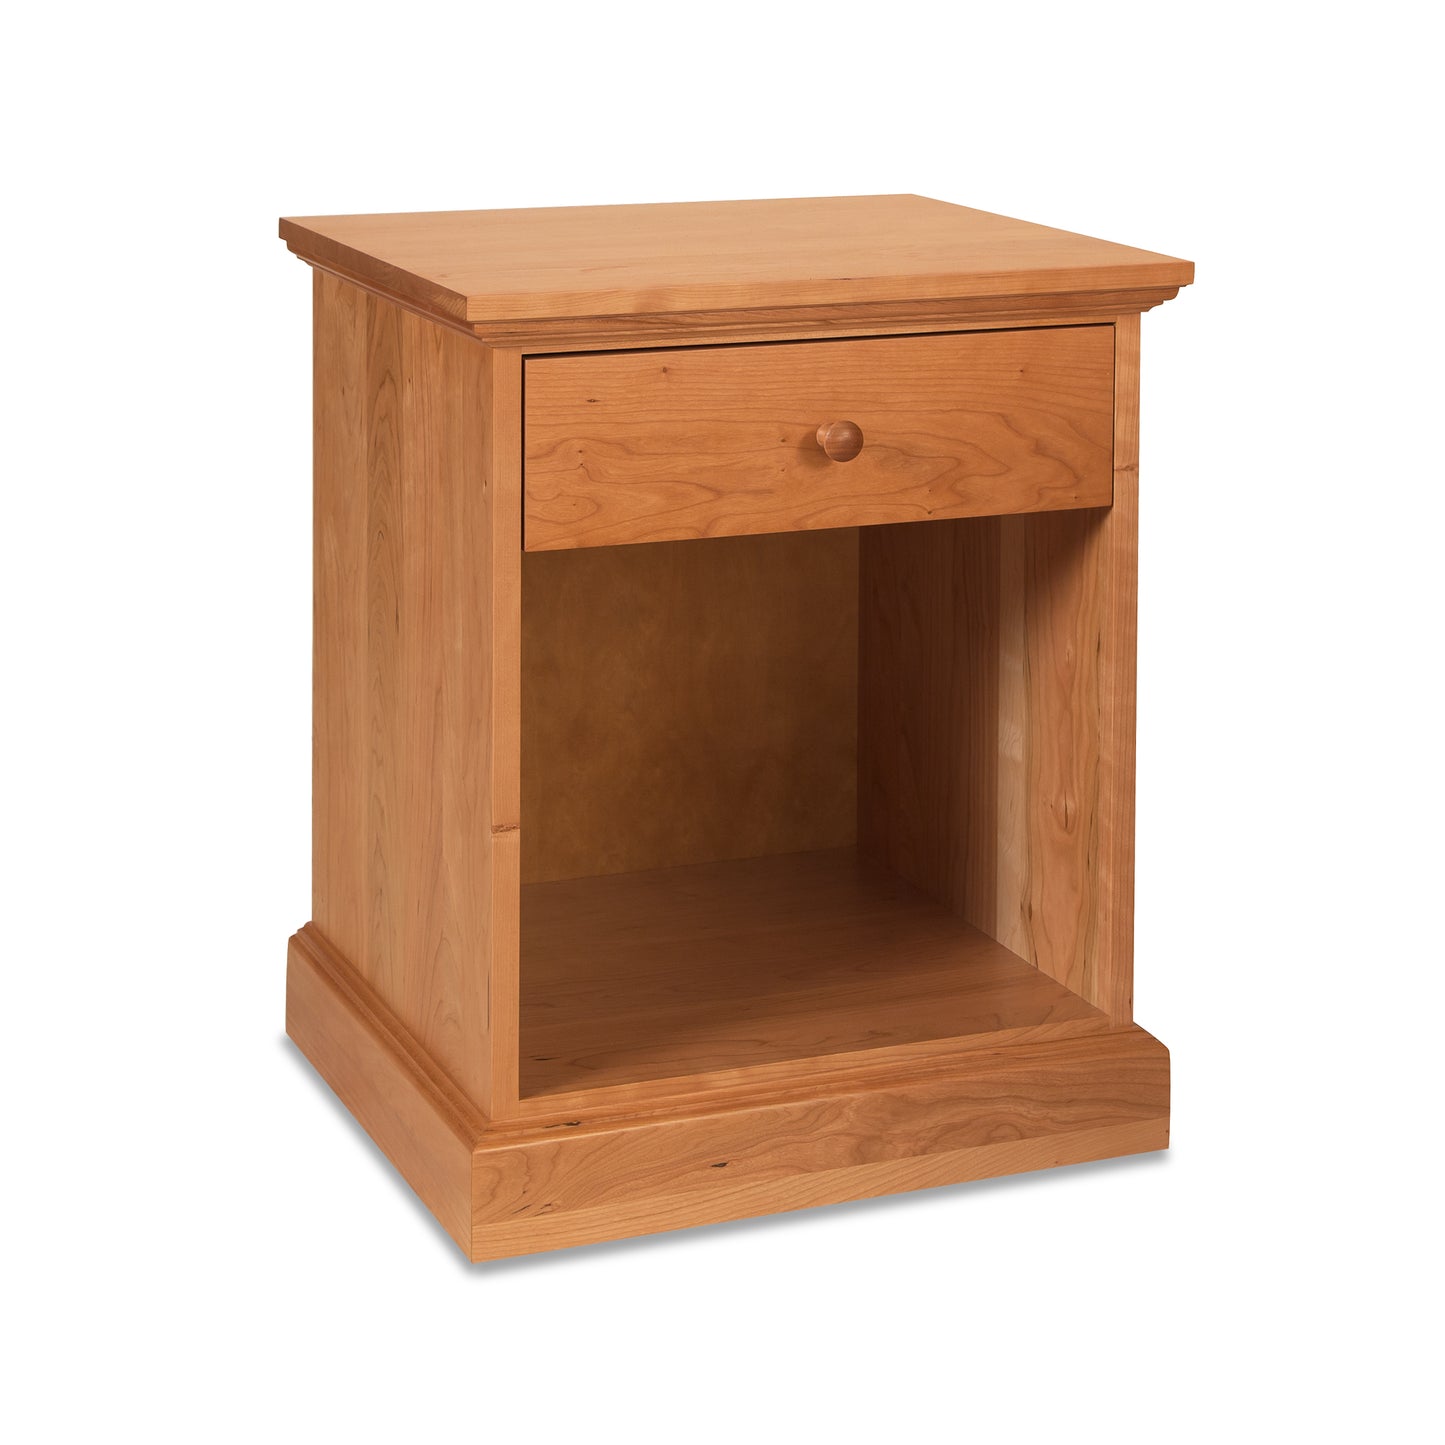 A luxury Lyndon Furniture New England Shaker 1-Drawer Enclosed Shelf nightstand with an elegant wooden design.